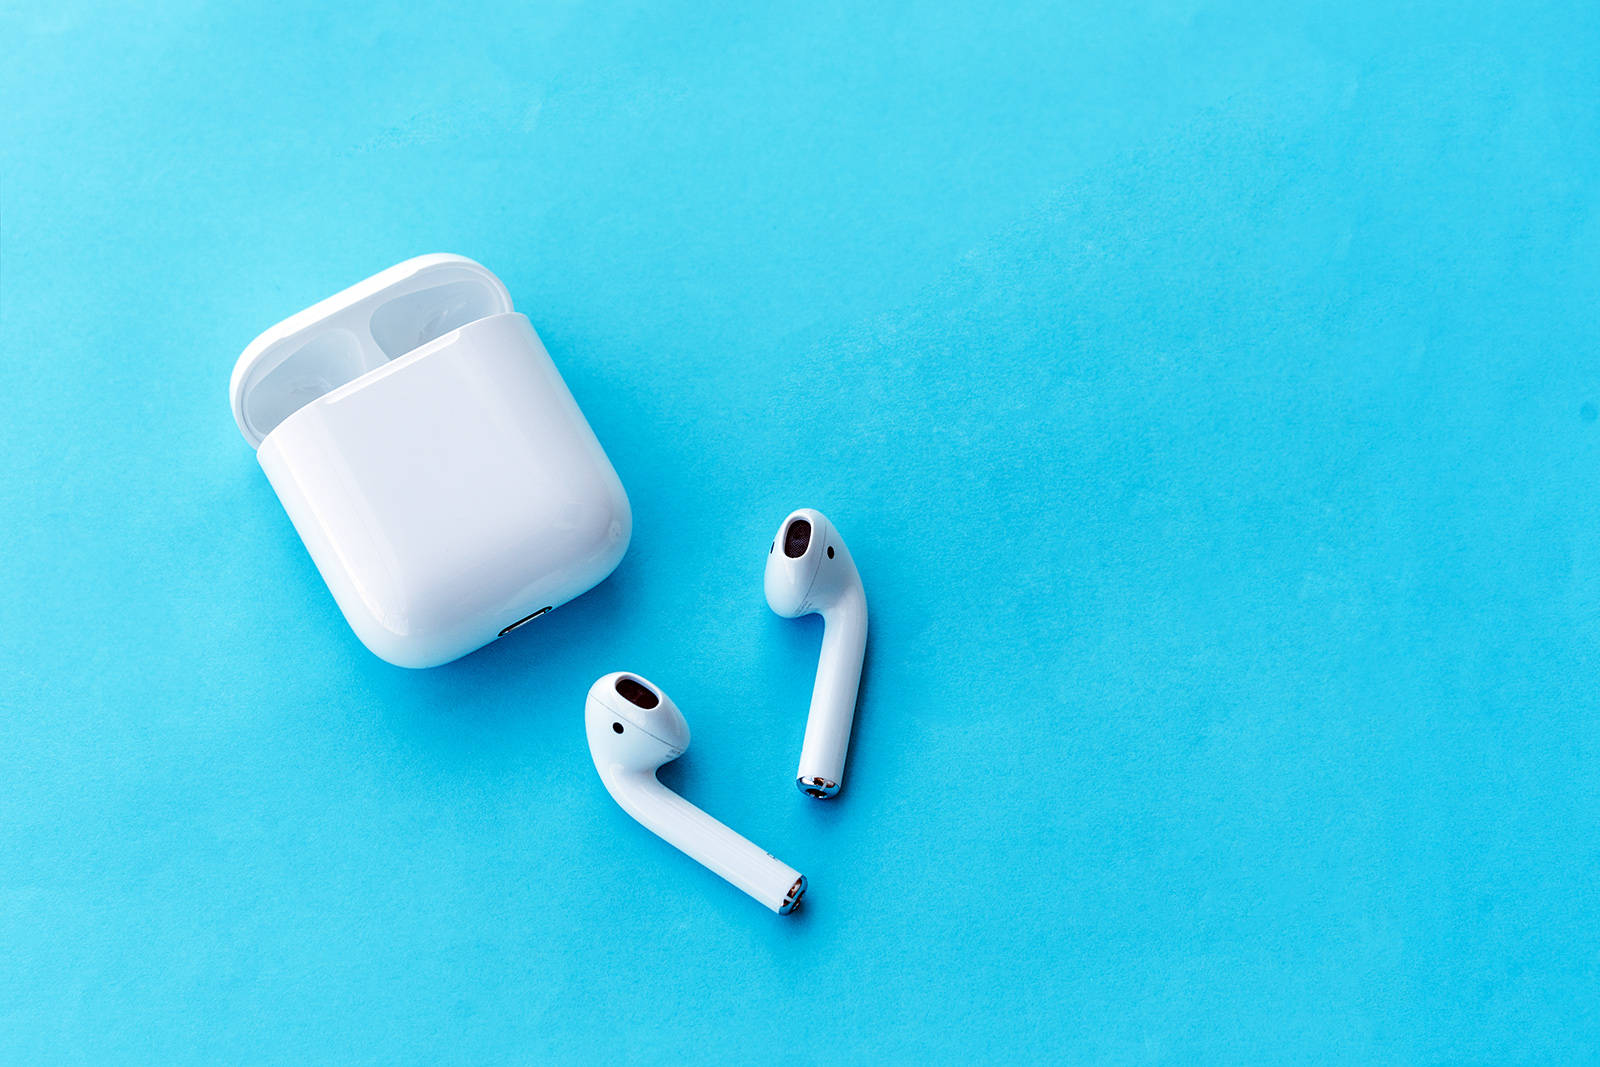 Simple AirPods In Blue Wallpaper